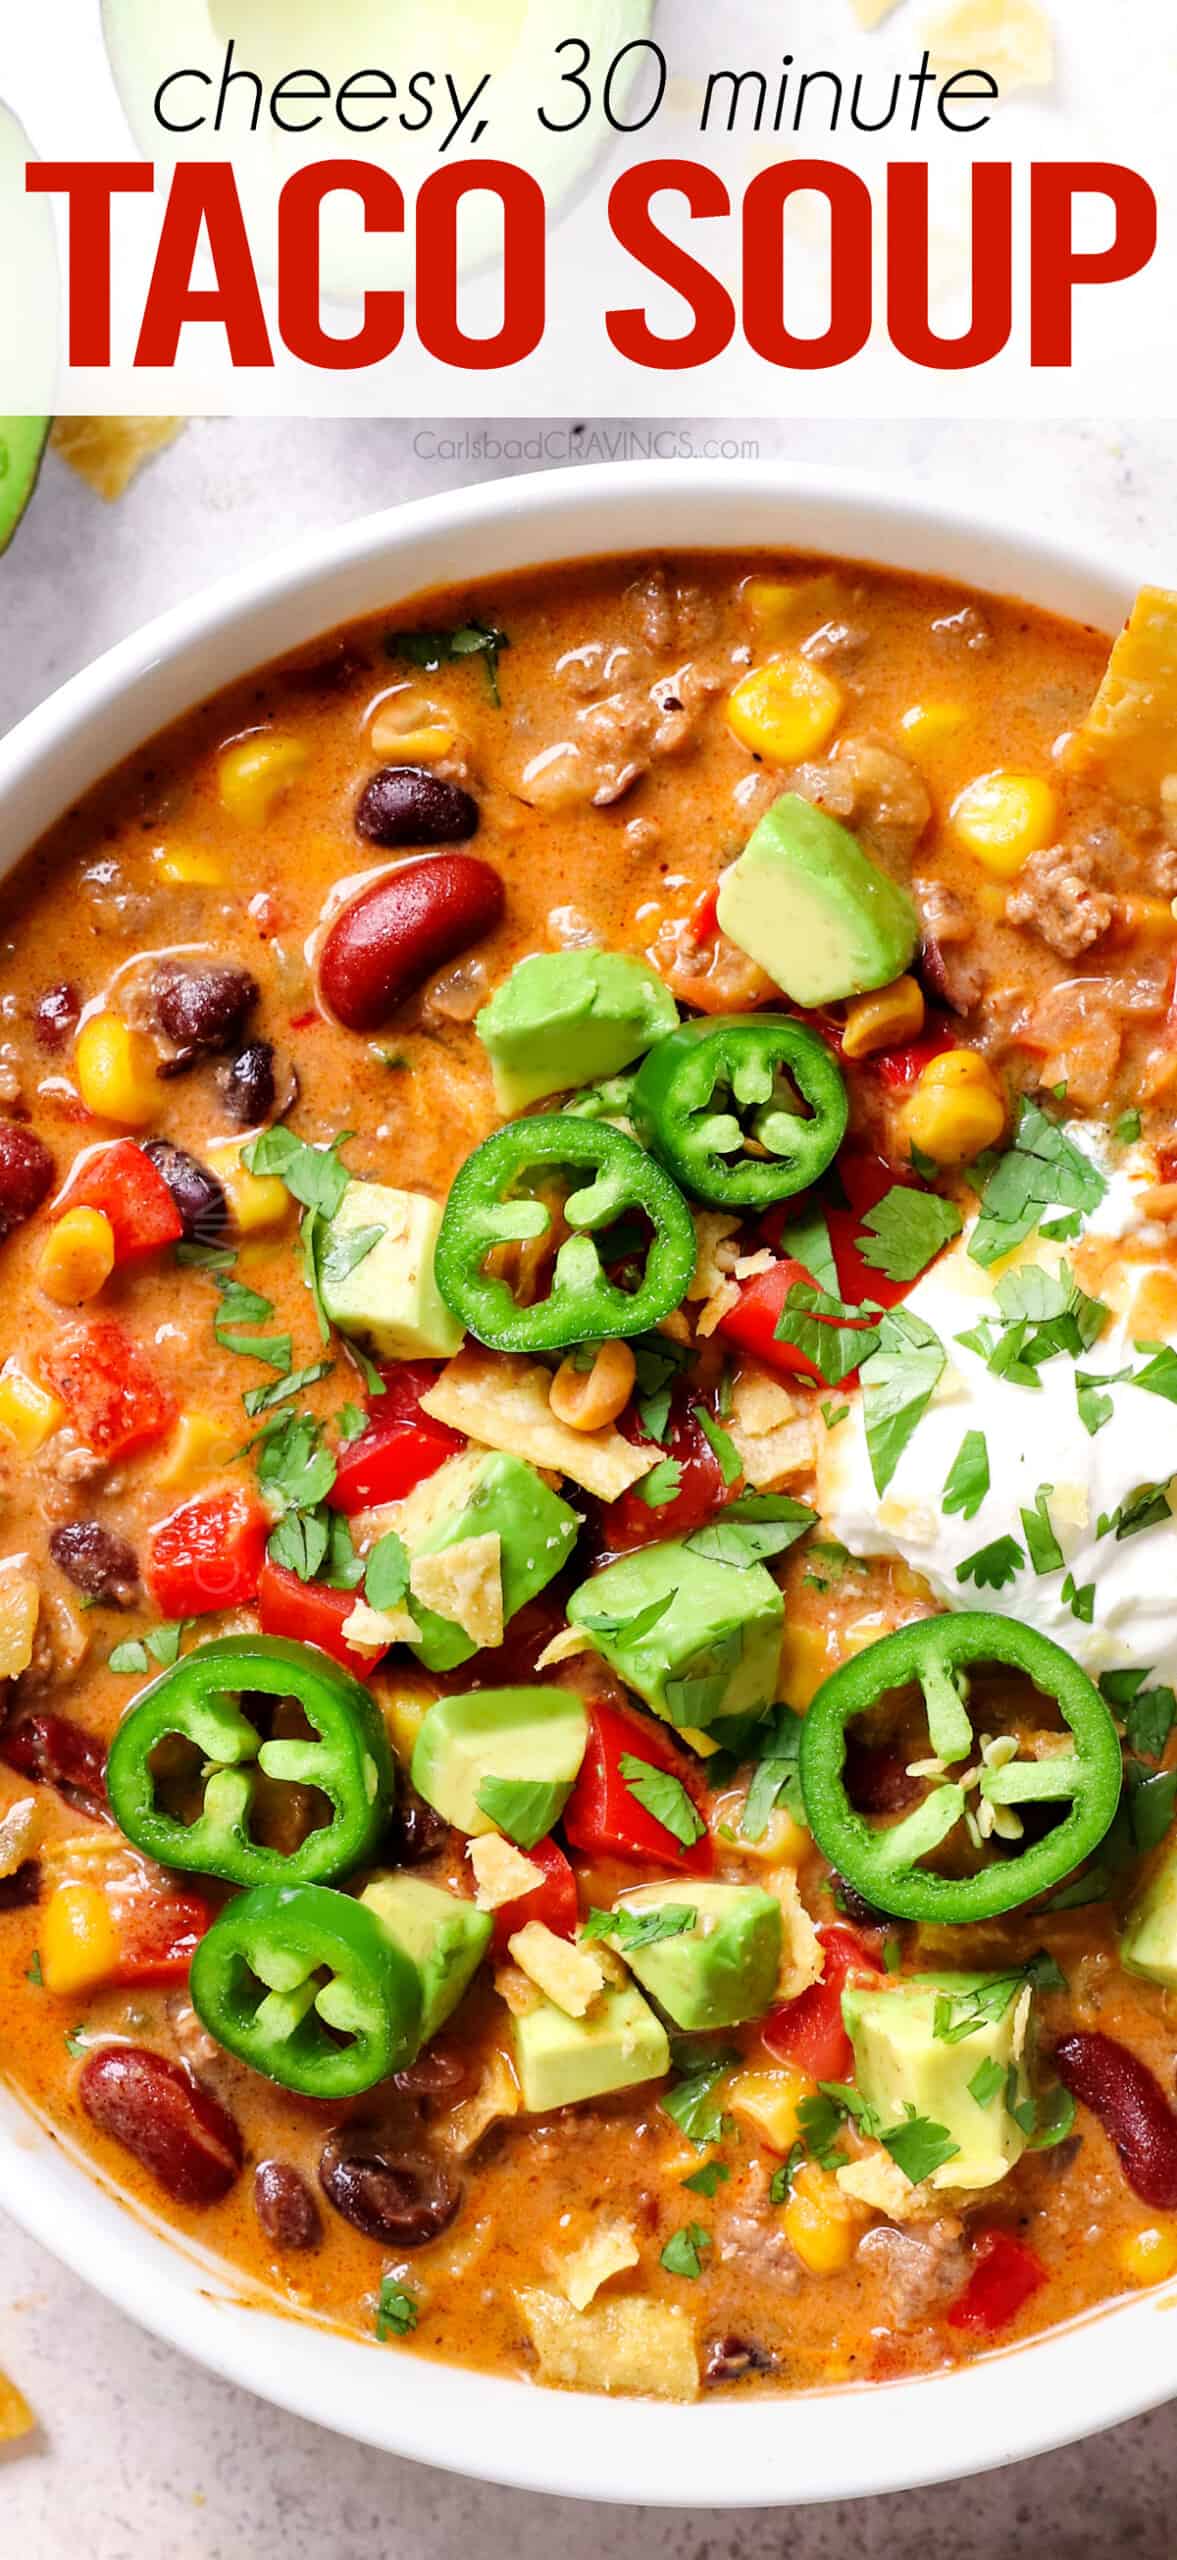 12 Freezer-Friendly Soups for a Quick & Easy Warm Meal